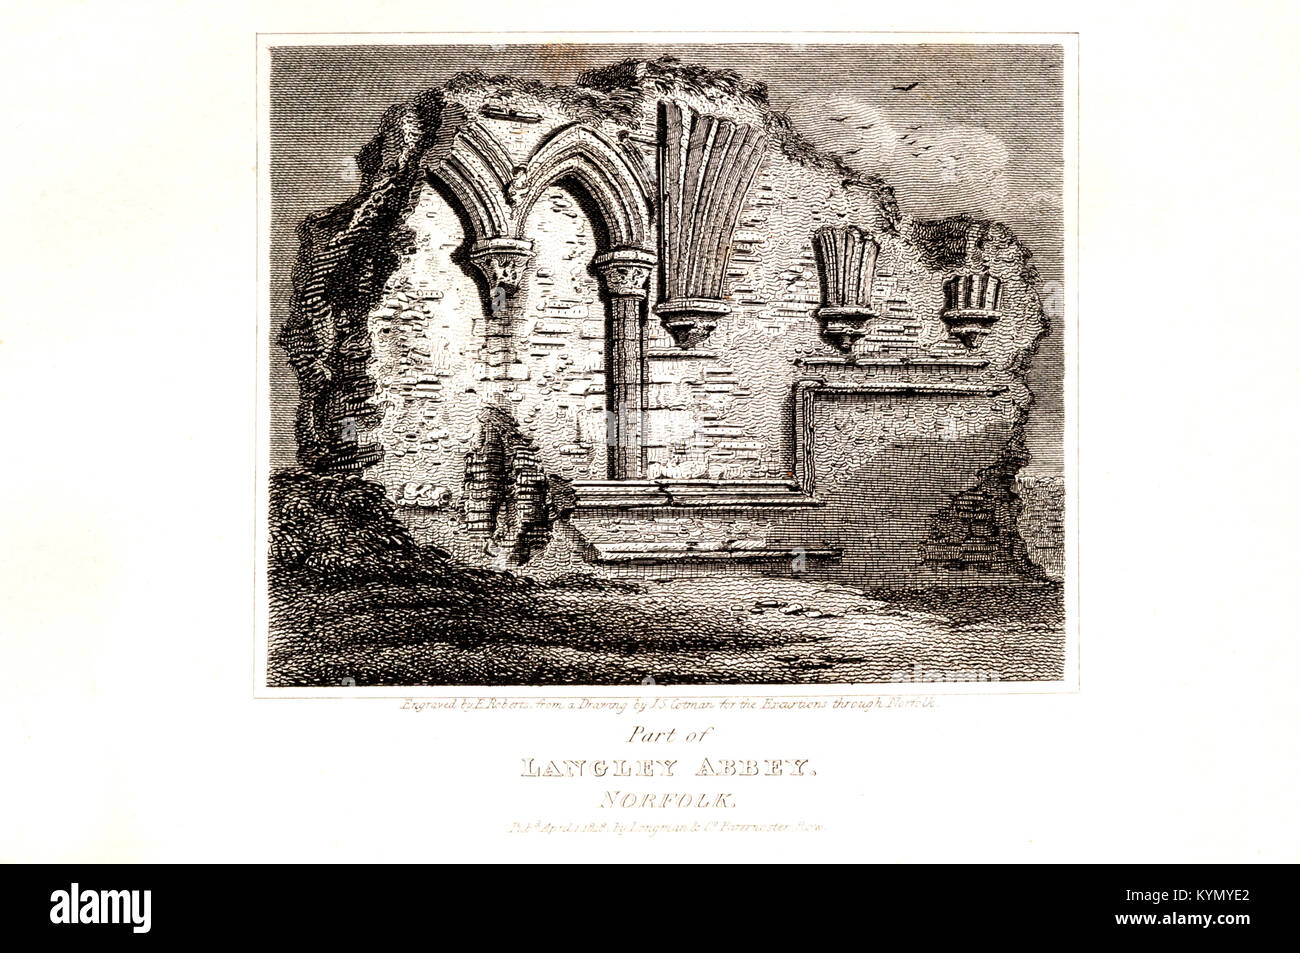 Engraving of Part of Langley Abbey, Norfolk by E. Roberts from a drawing by J S Cotman.  From Excursions through Norfolk 1818. Stock Photo